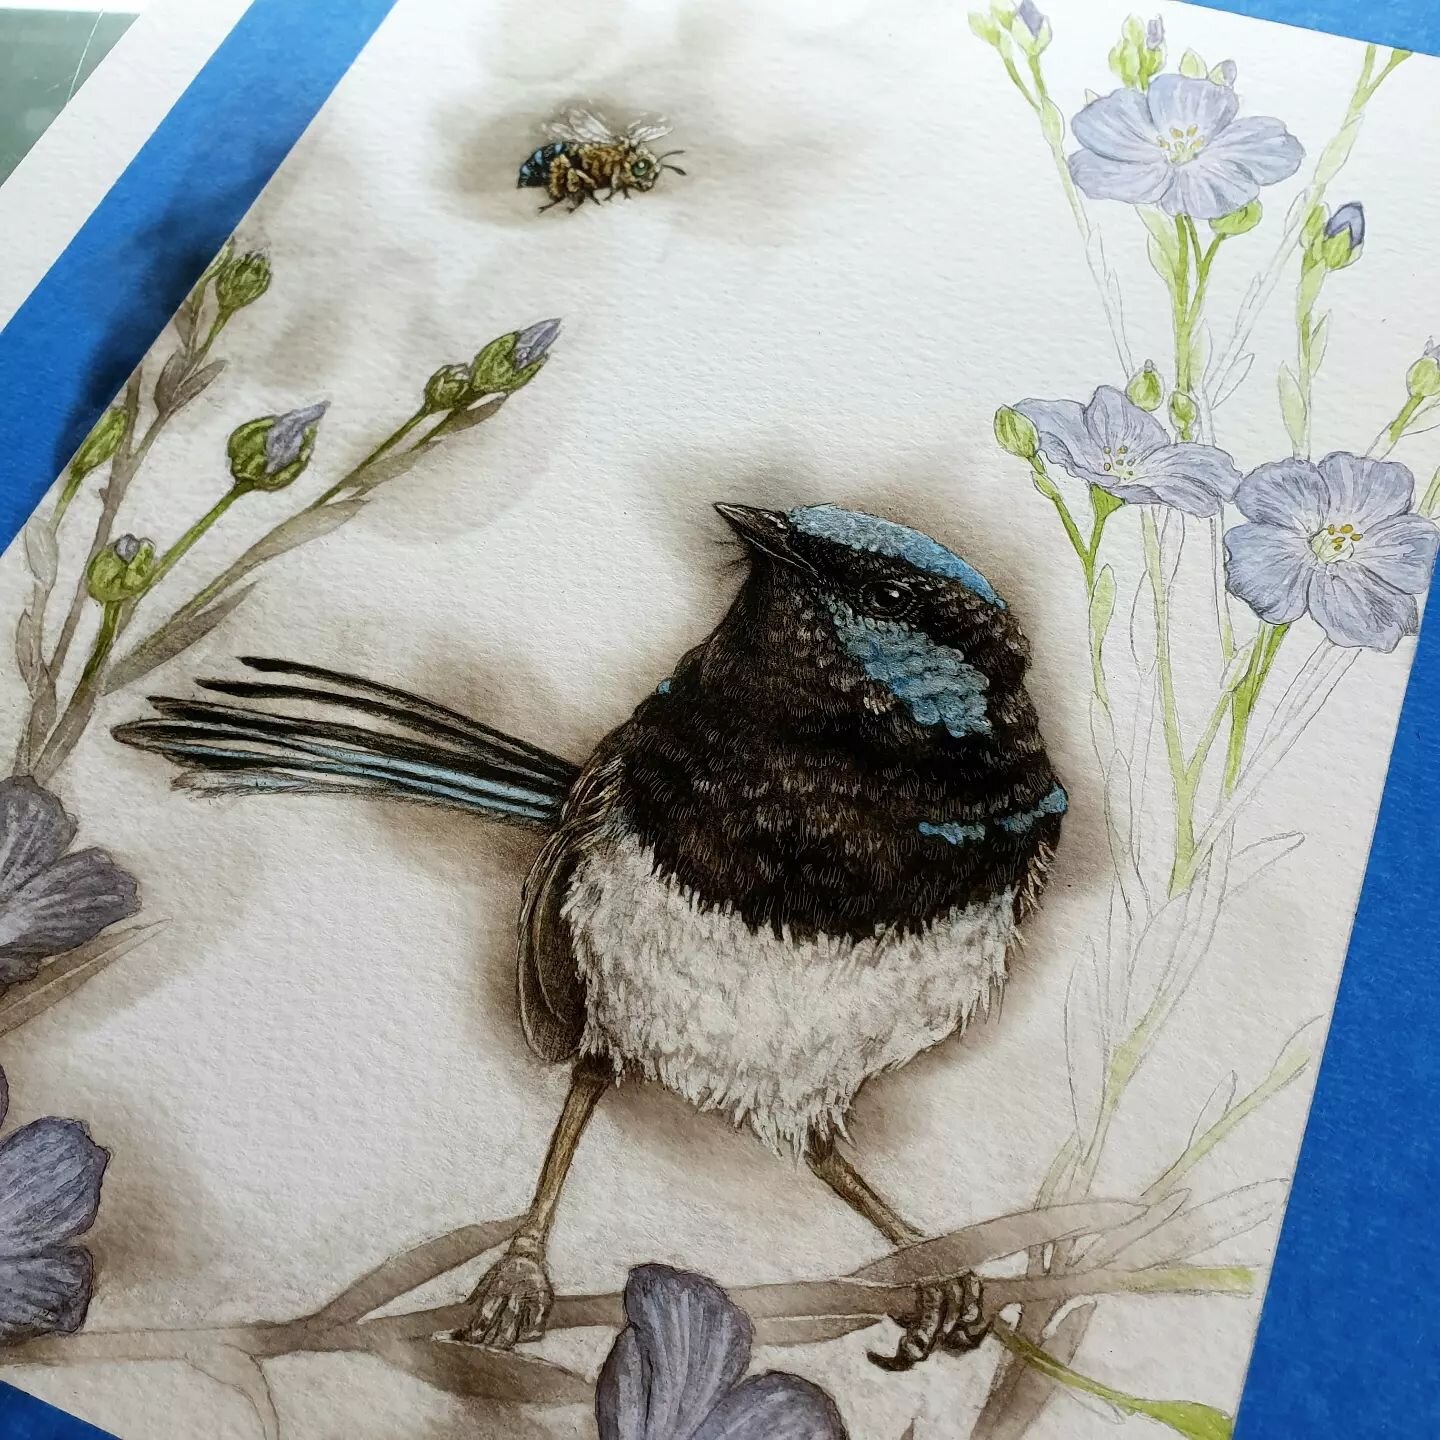 Superb Fairy- Wren is burning nicely!🔥 Catching up on posts that I've missed on Instagram, sorry for being MIA for most of the year! Stay tuned 🥰
#art #paintingwithfire #fumage #wildlife #birds #instaart #birdsofinstagram #australia #native